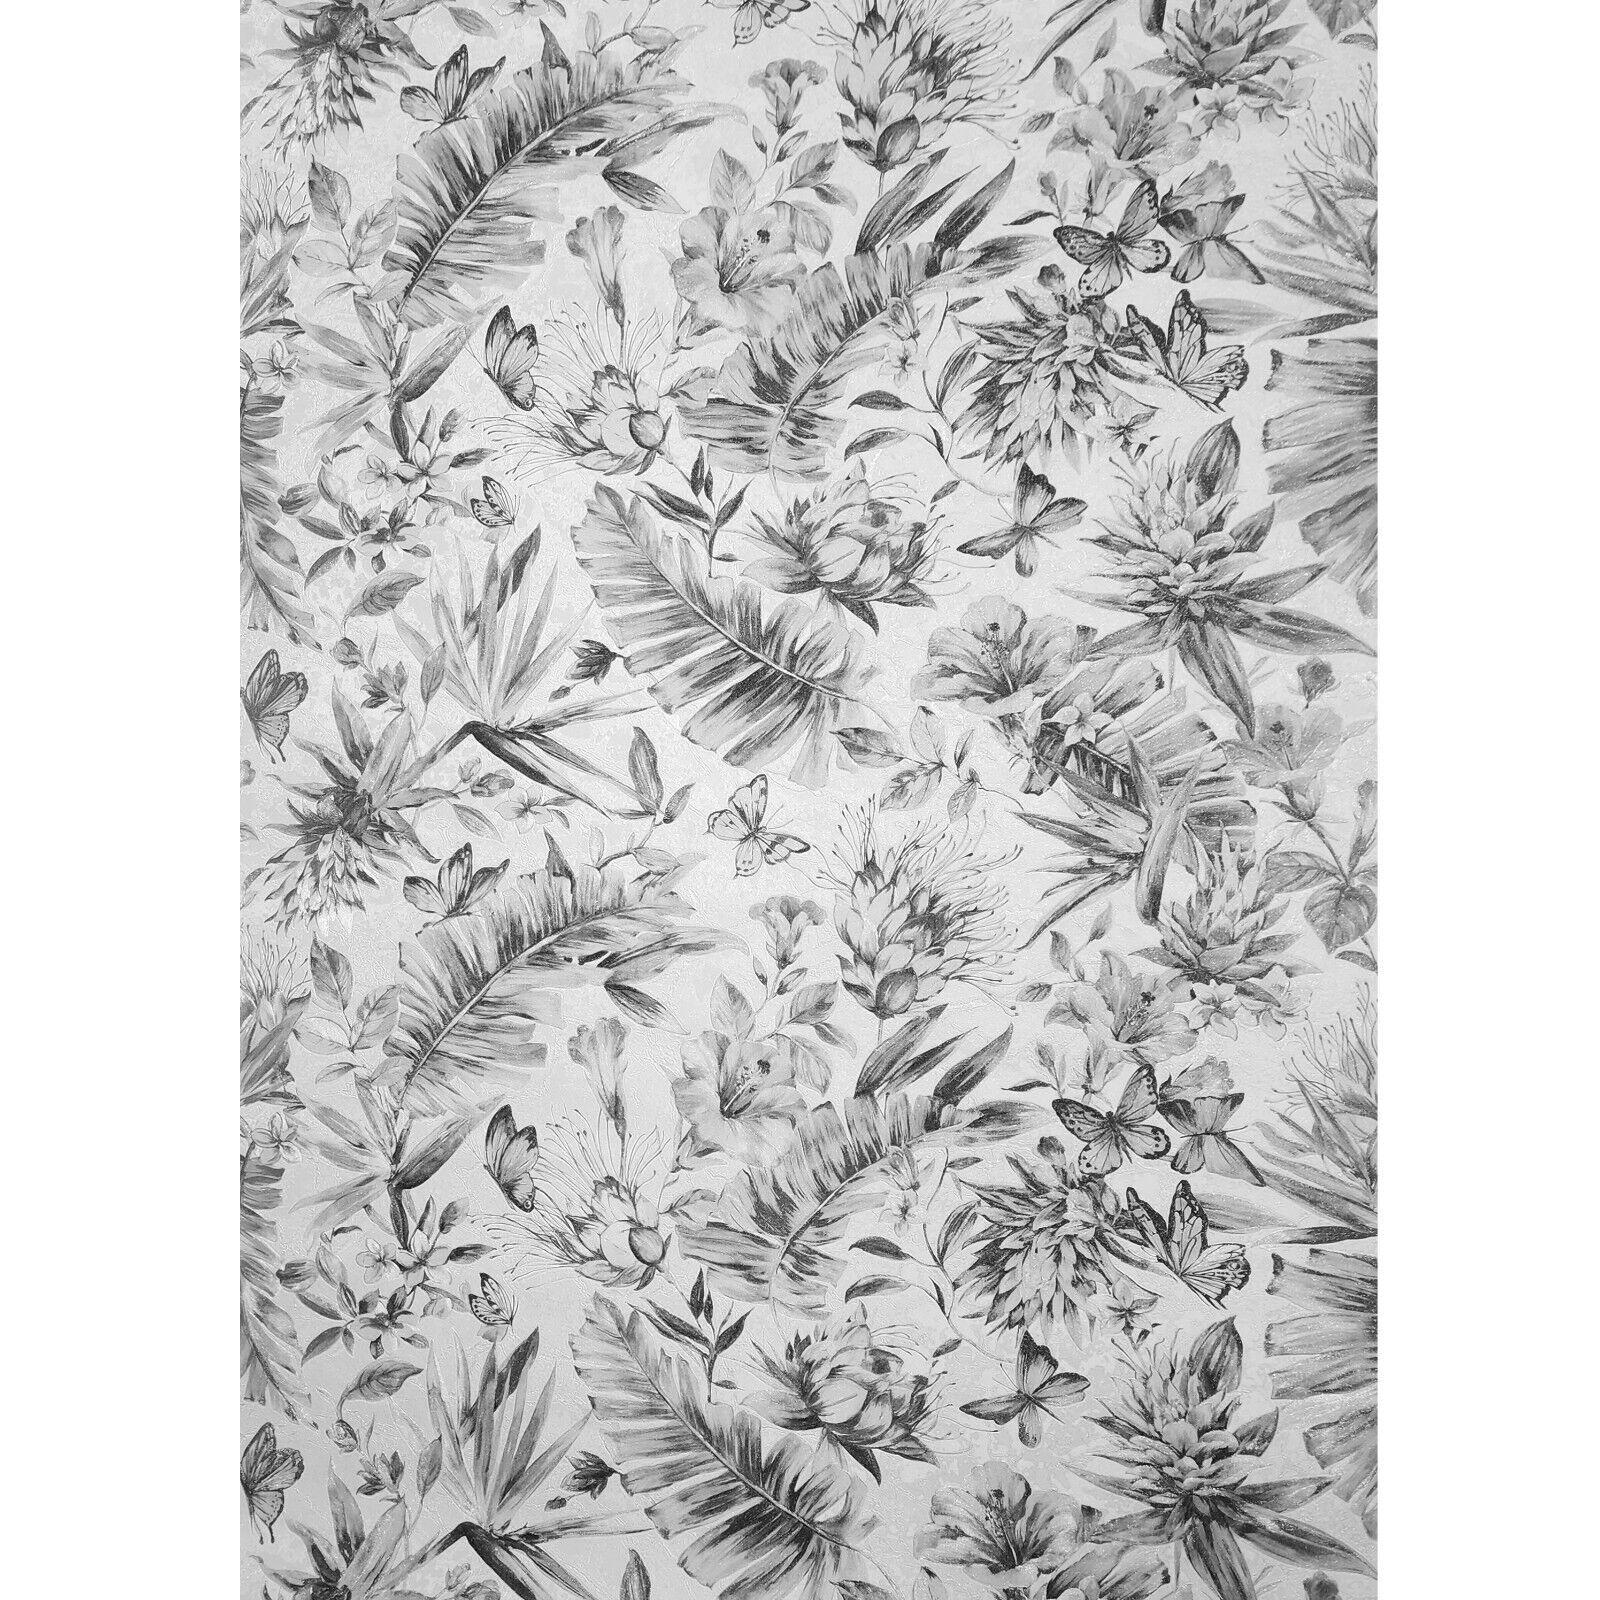 Z80017 Floral white gray silver metallic tropical flowers textured 